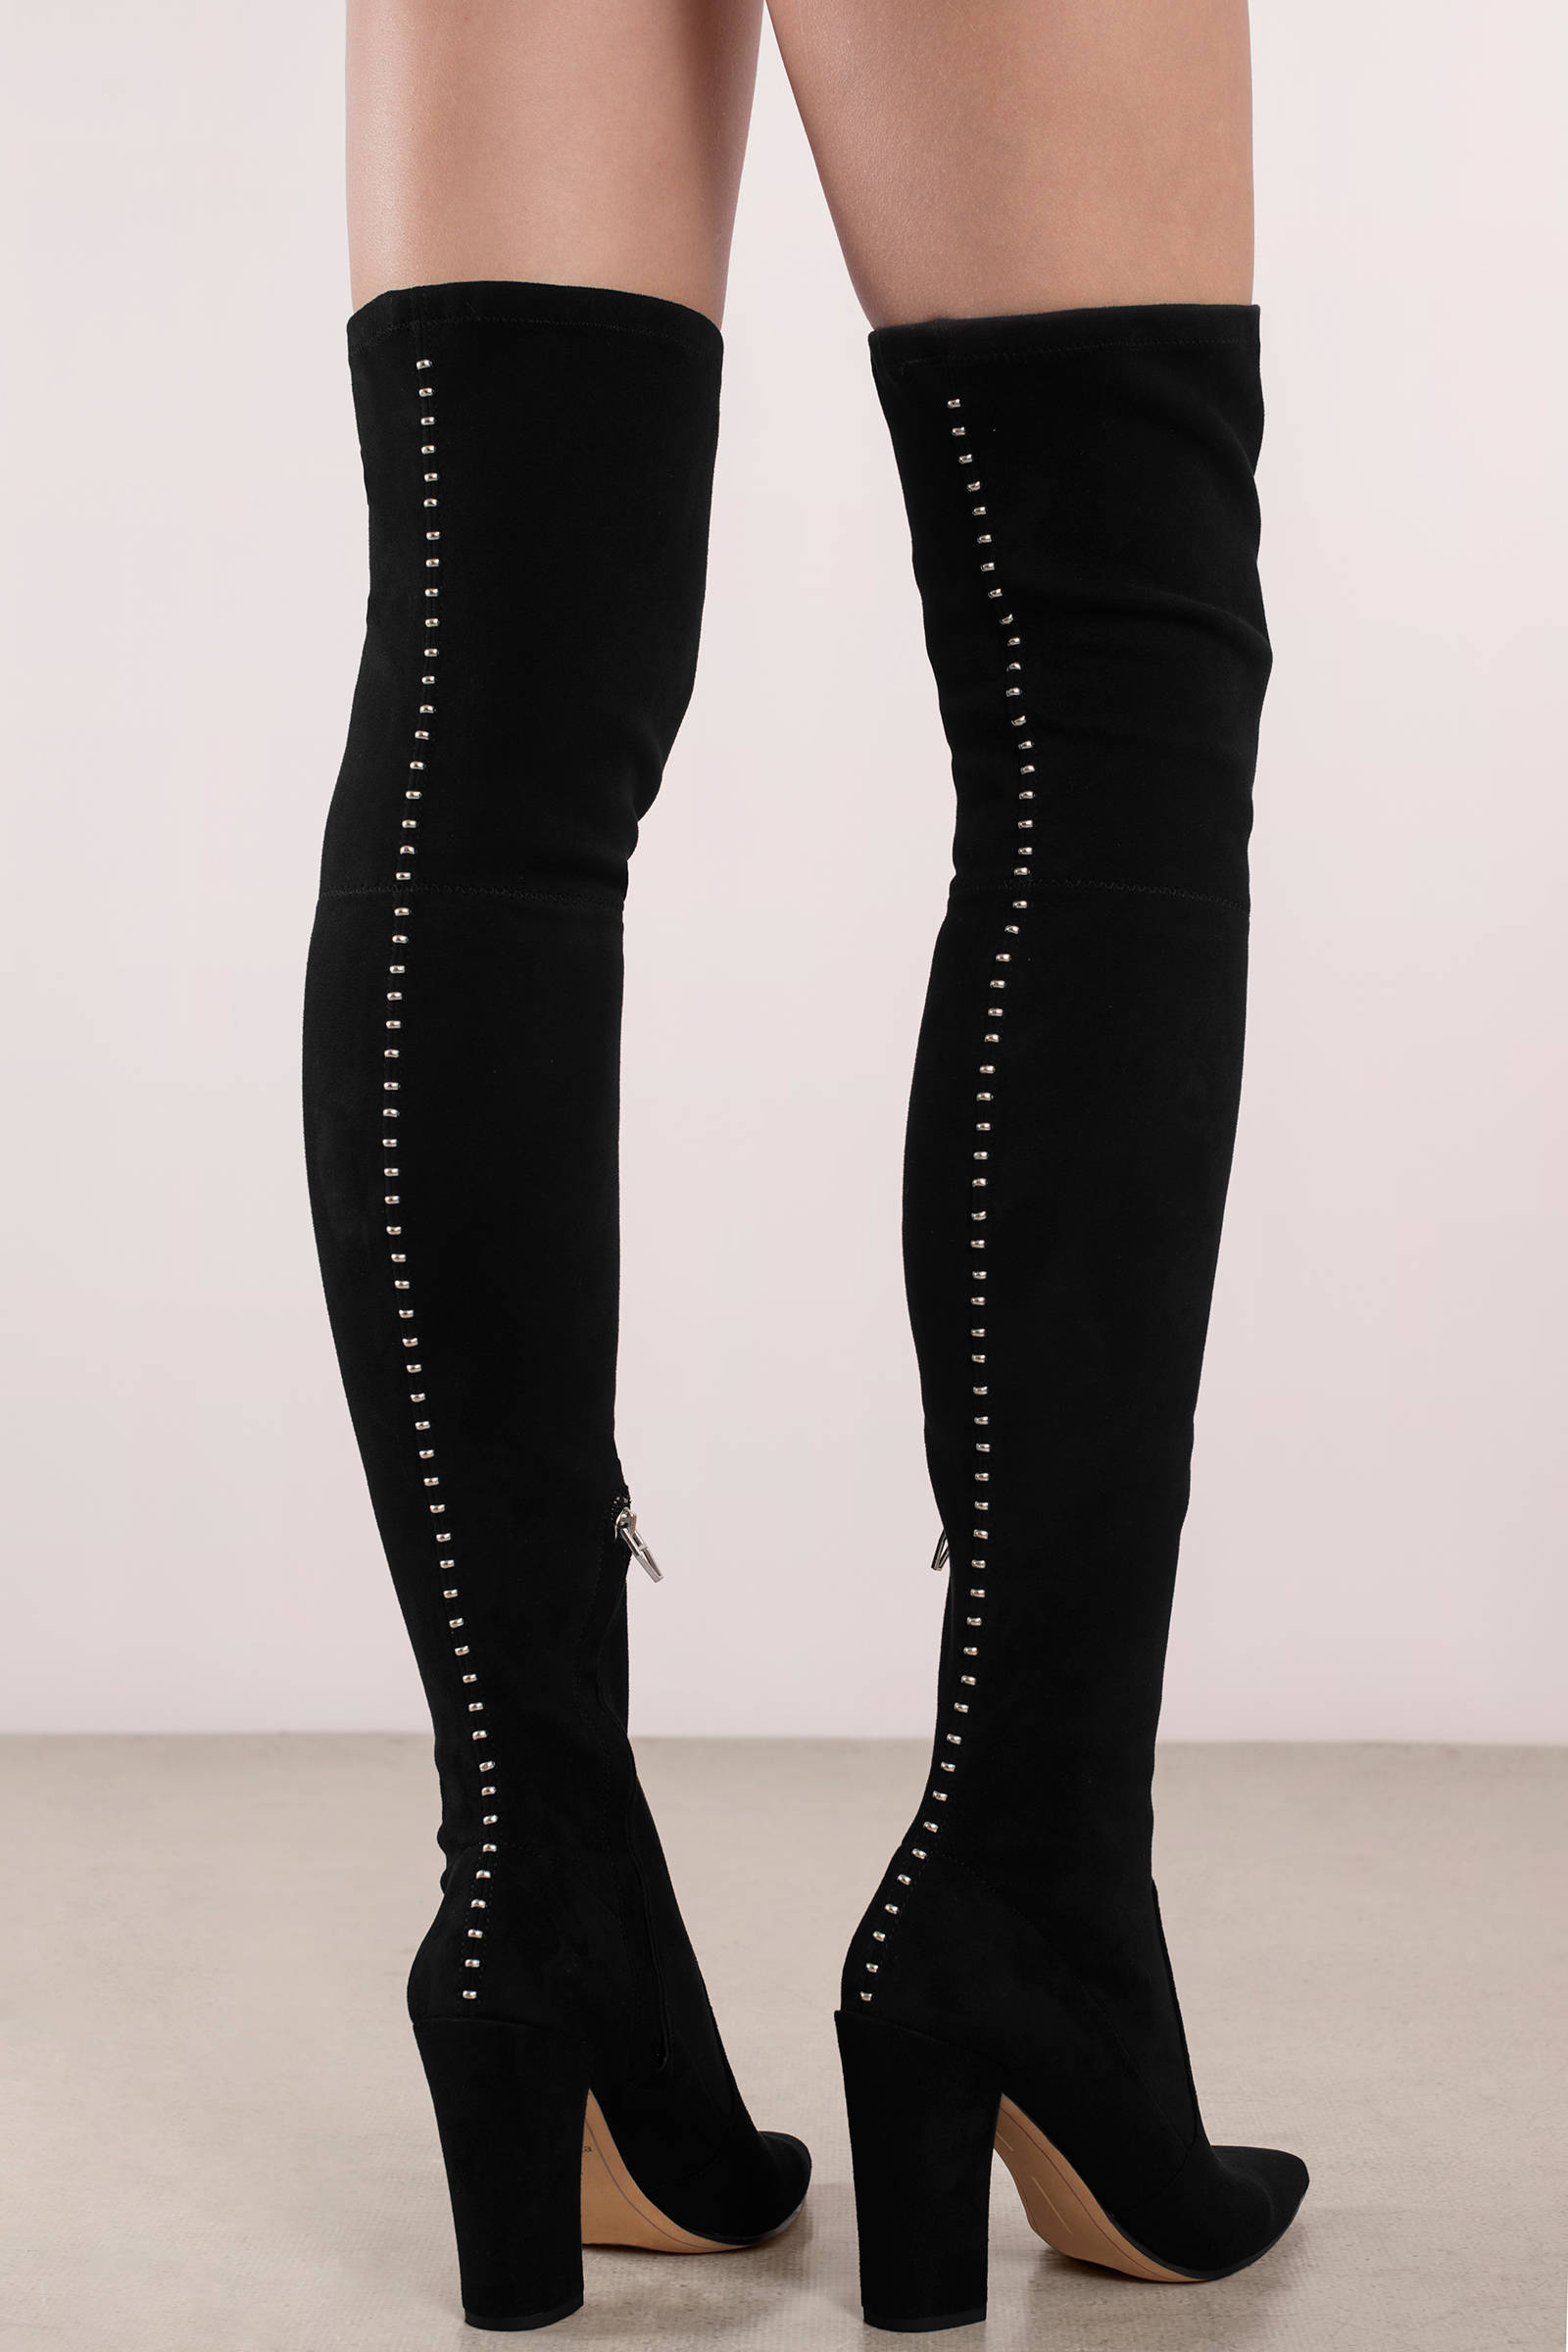 Emmy Studded Suede Thigh High Boots in Black - $100 | Tobi US